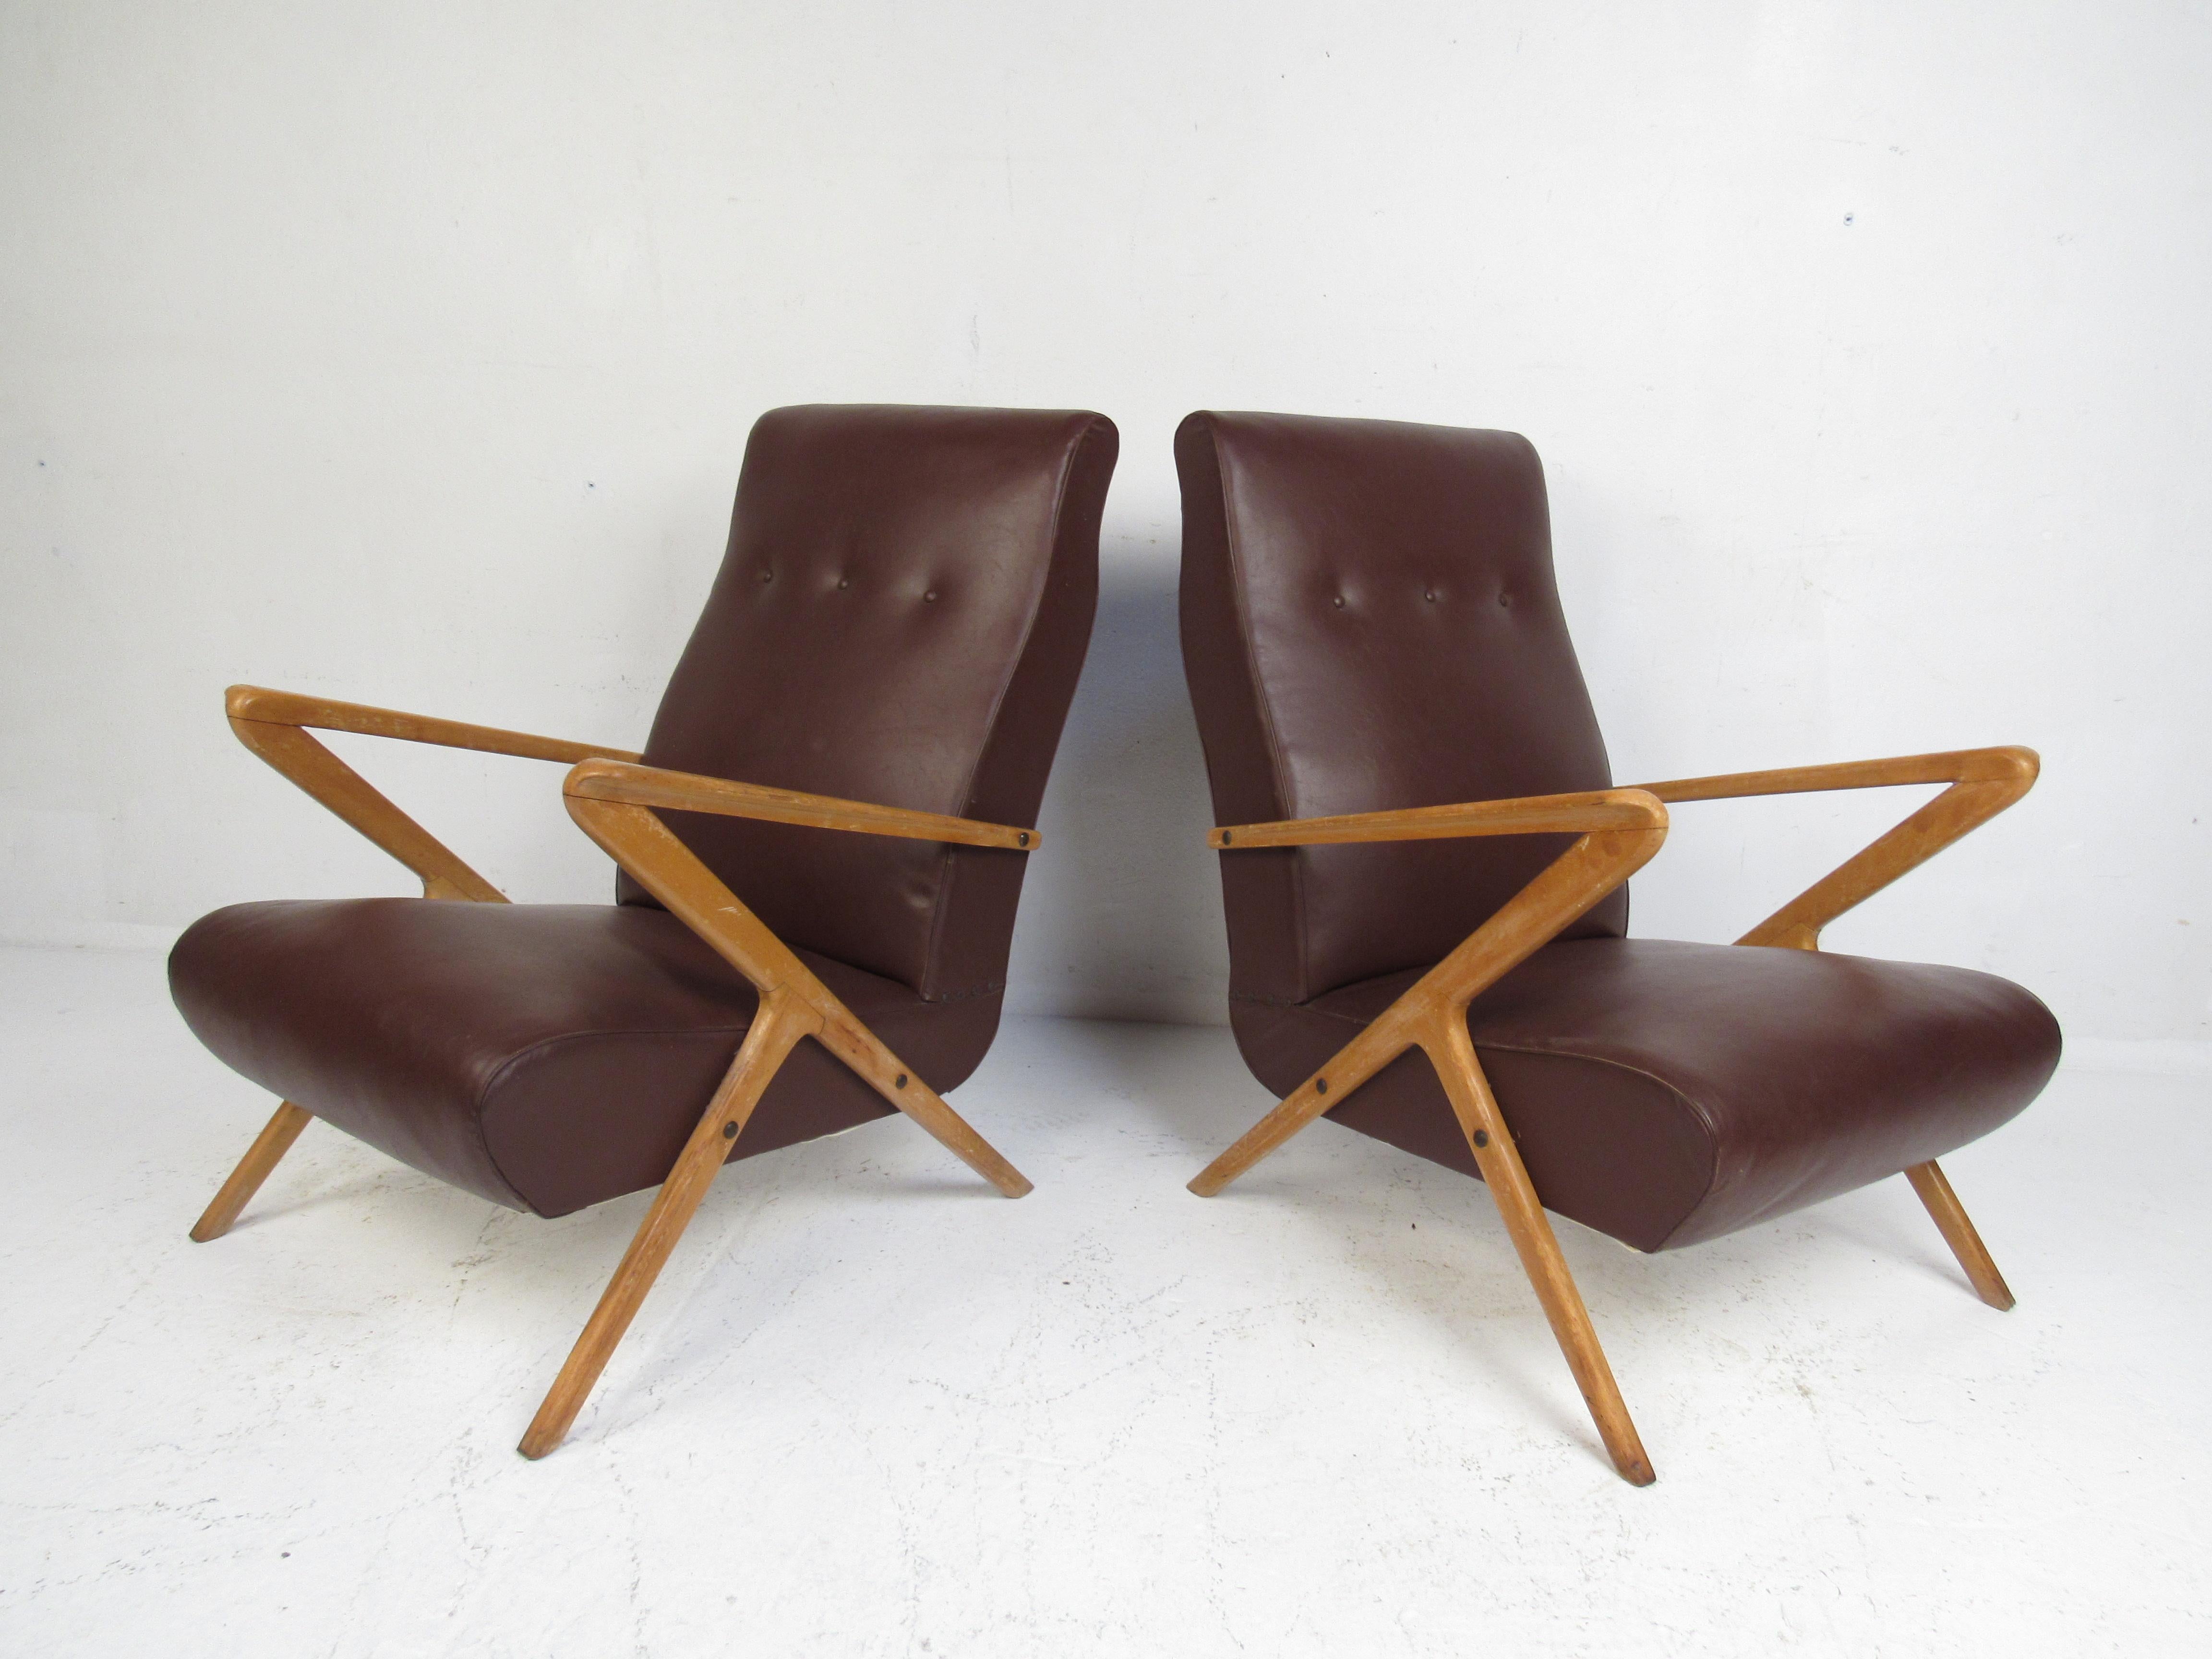 A stunning pair of vintage Italian modern lounge chairs that feature a sculpted teak frame with 